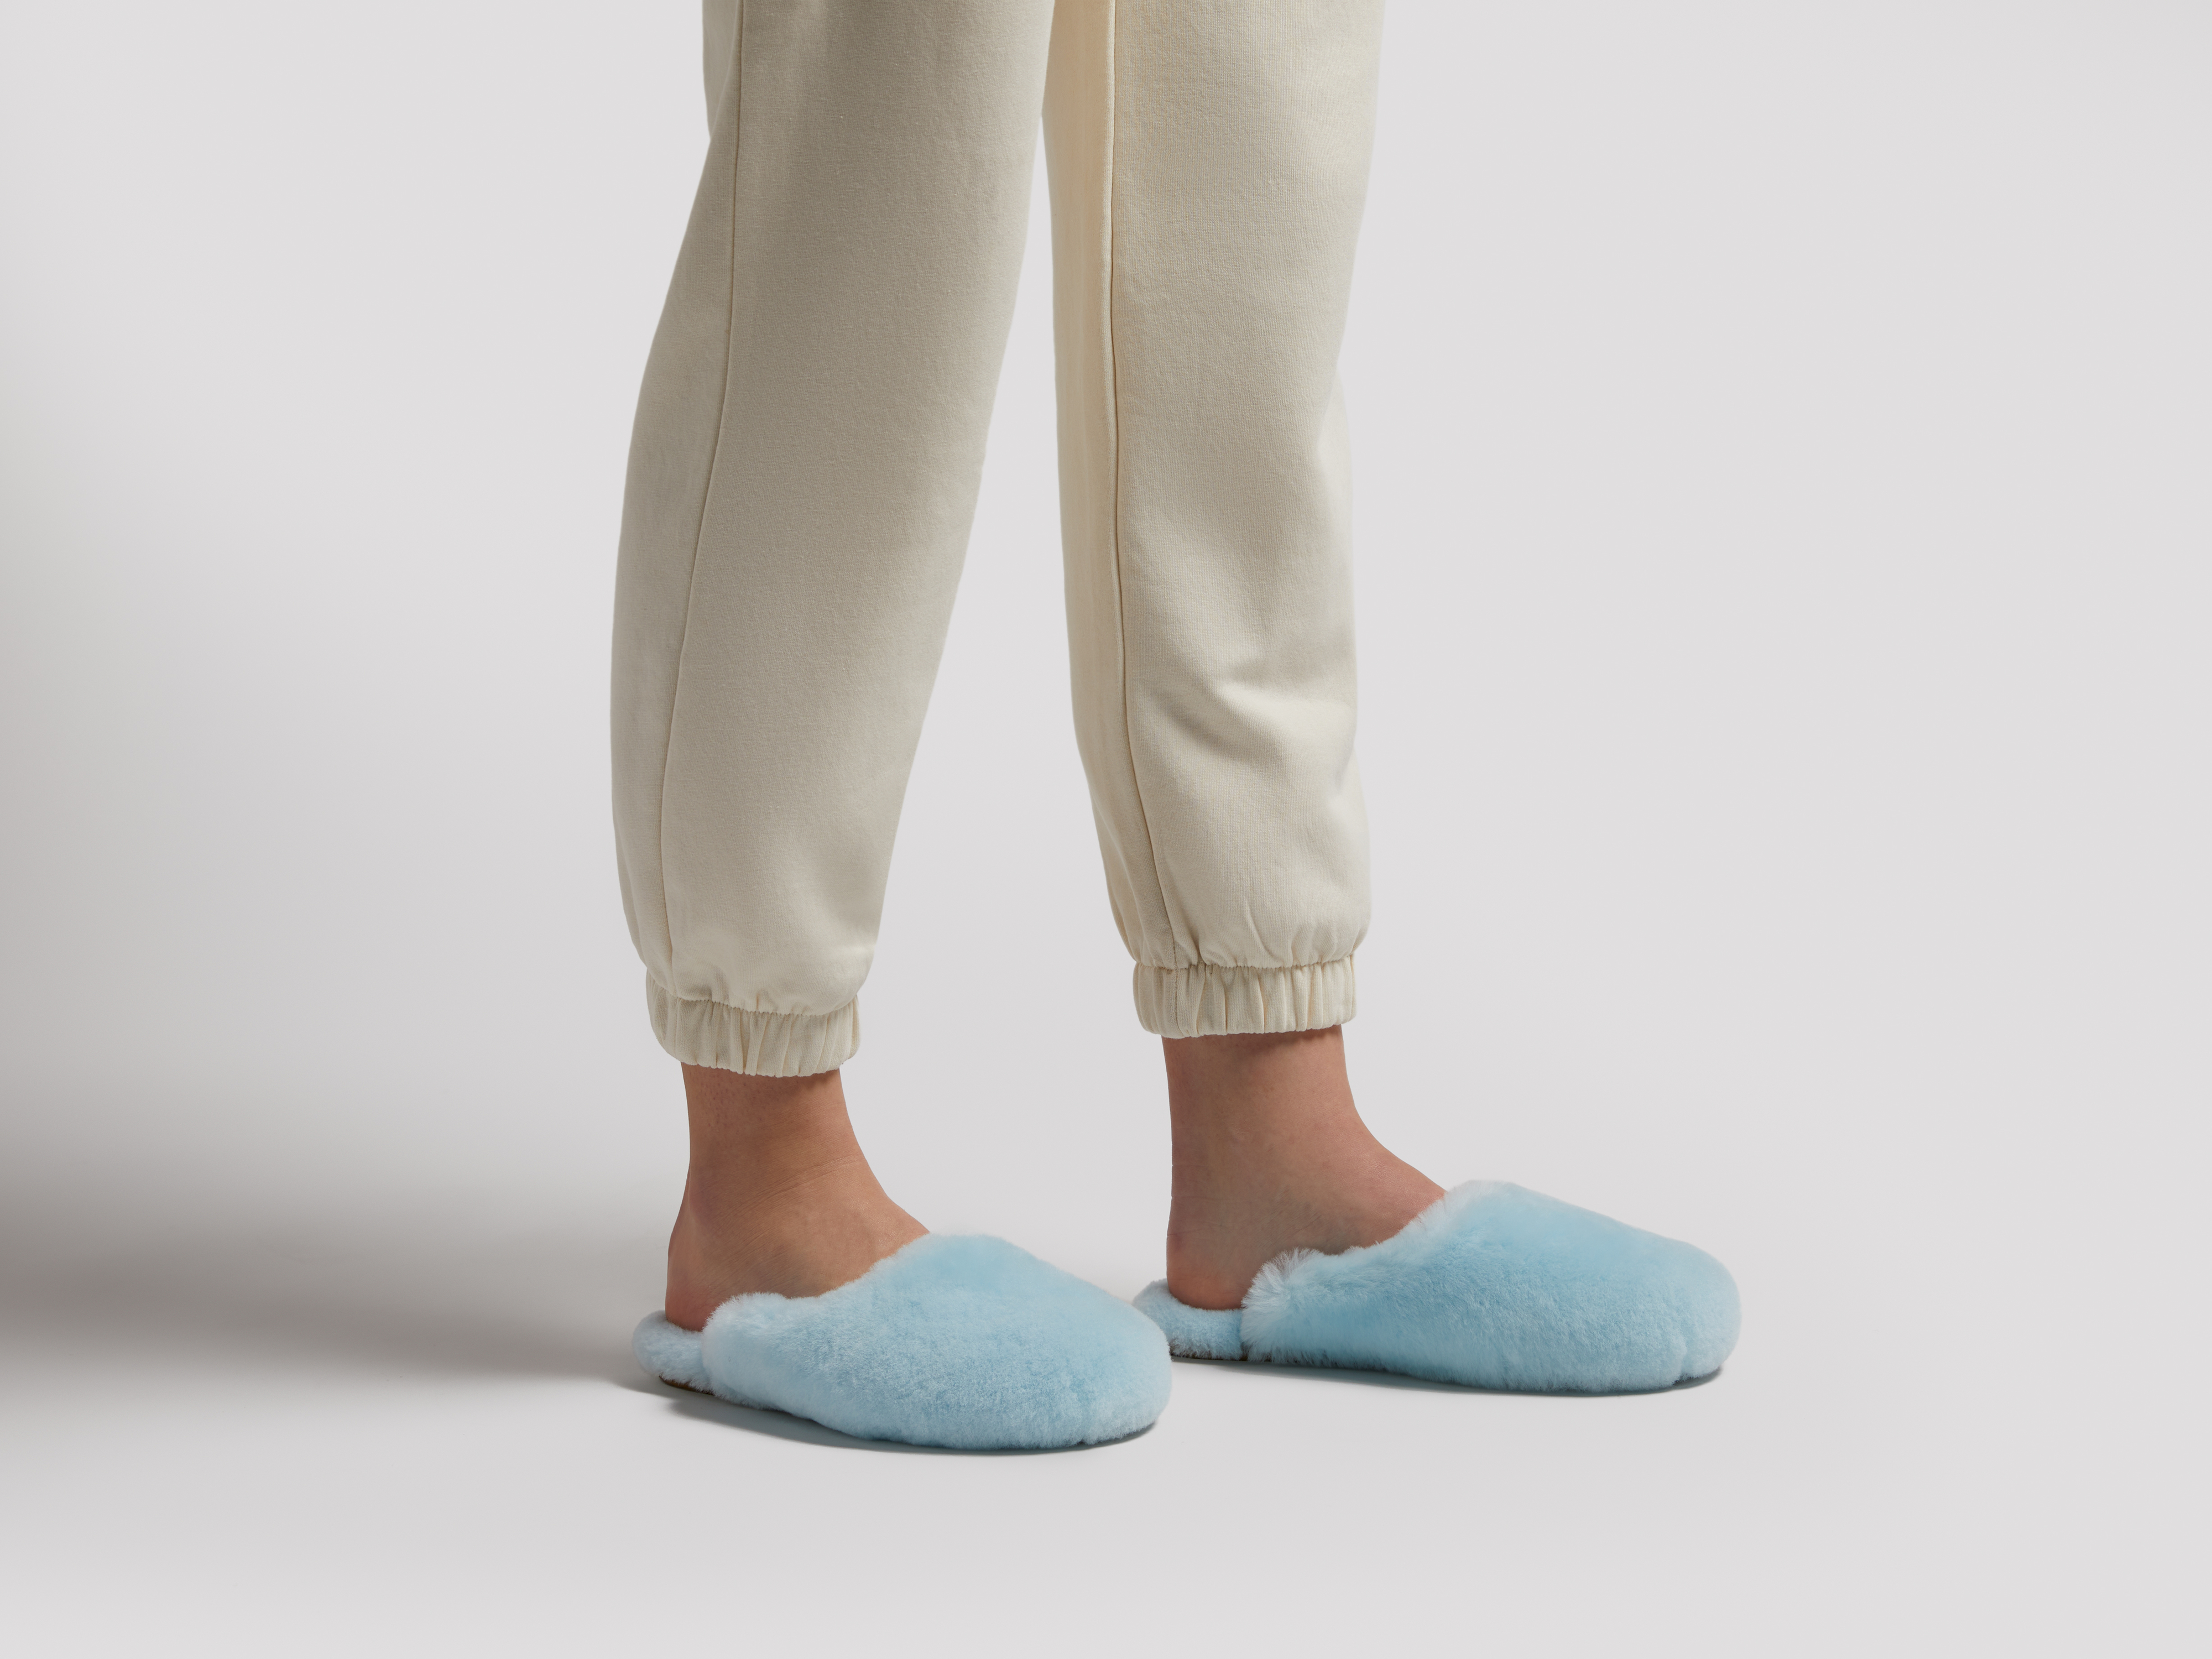 Feet wearing cream-colored sweatpants and fuzzy blue slippers, standing on a white background